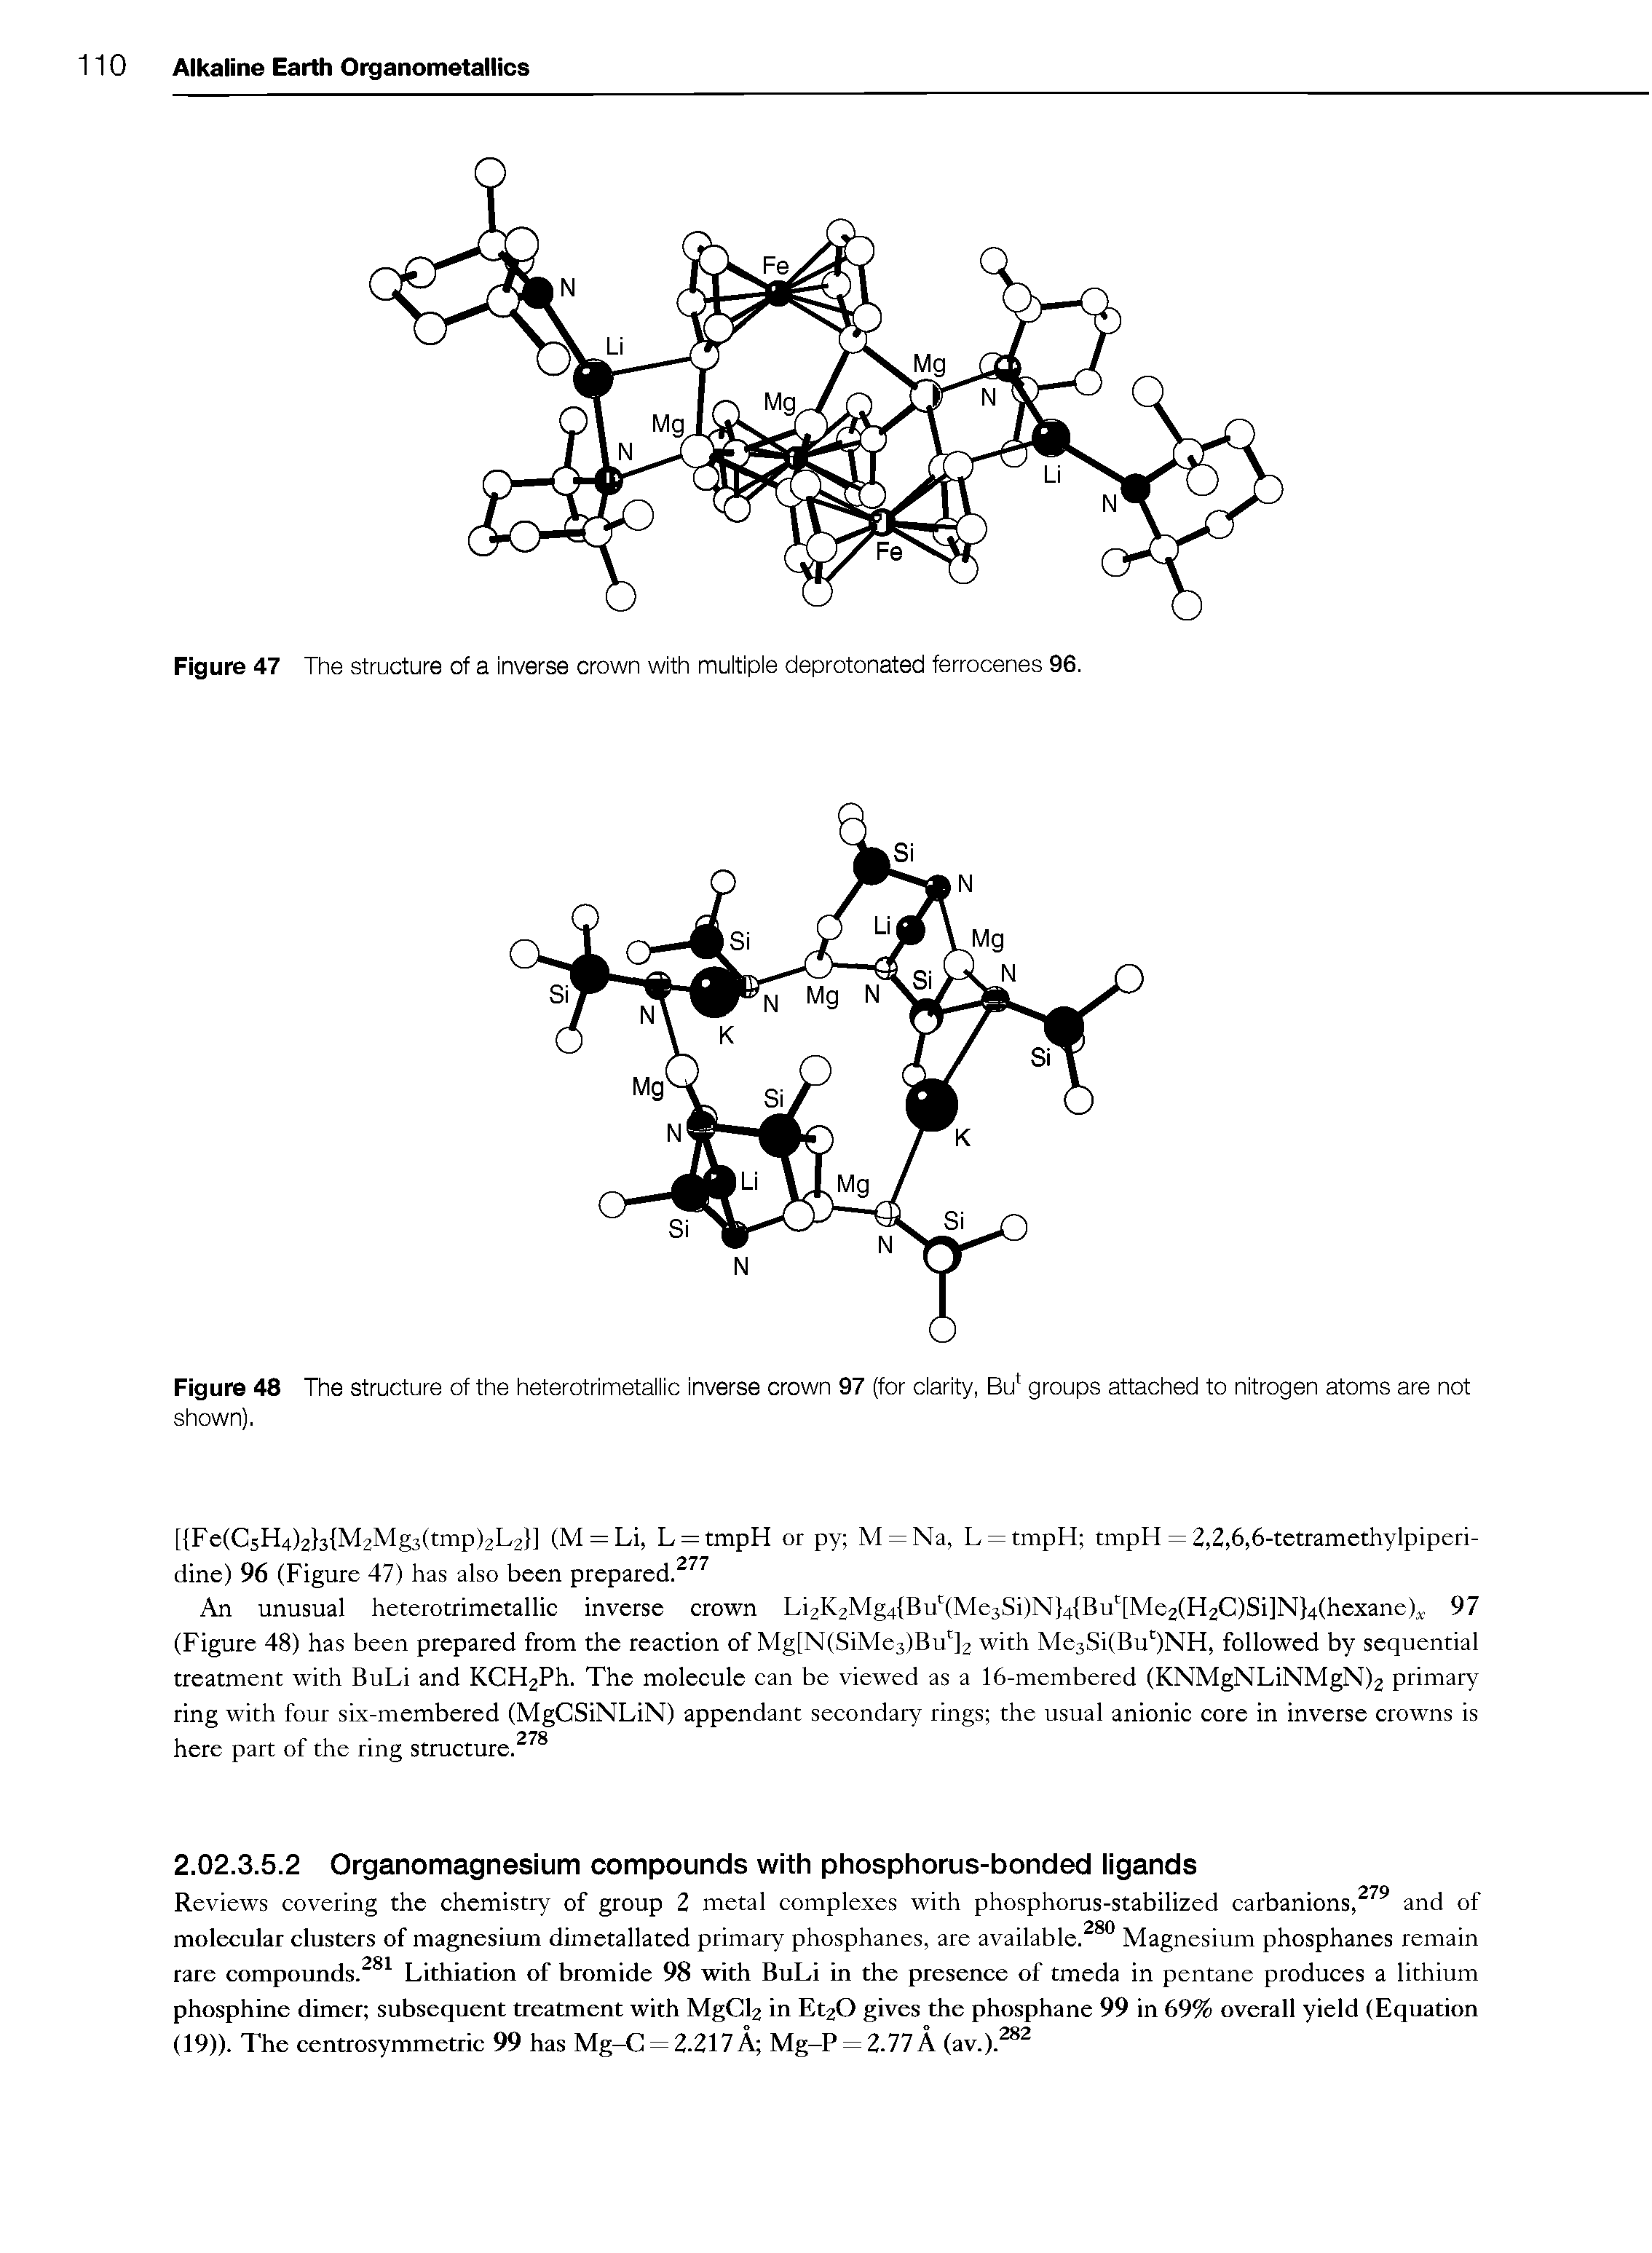 Figure 48 The structure of the heterotrimetallic inverse crown 97 (for clarity, Bu groups attached to nitrogen atoms are not shown).